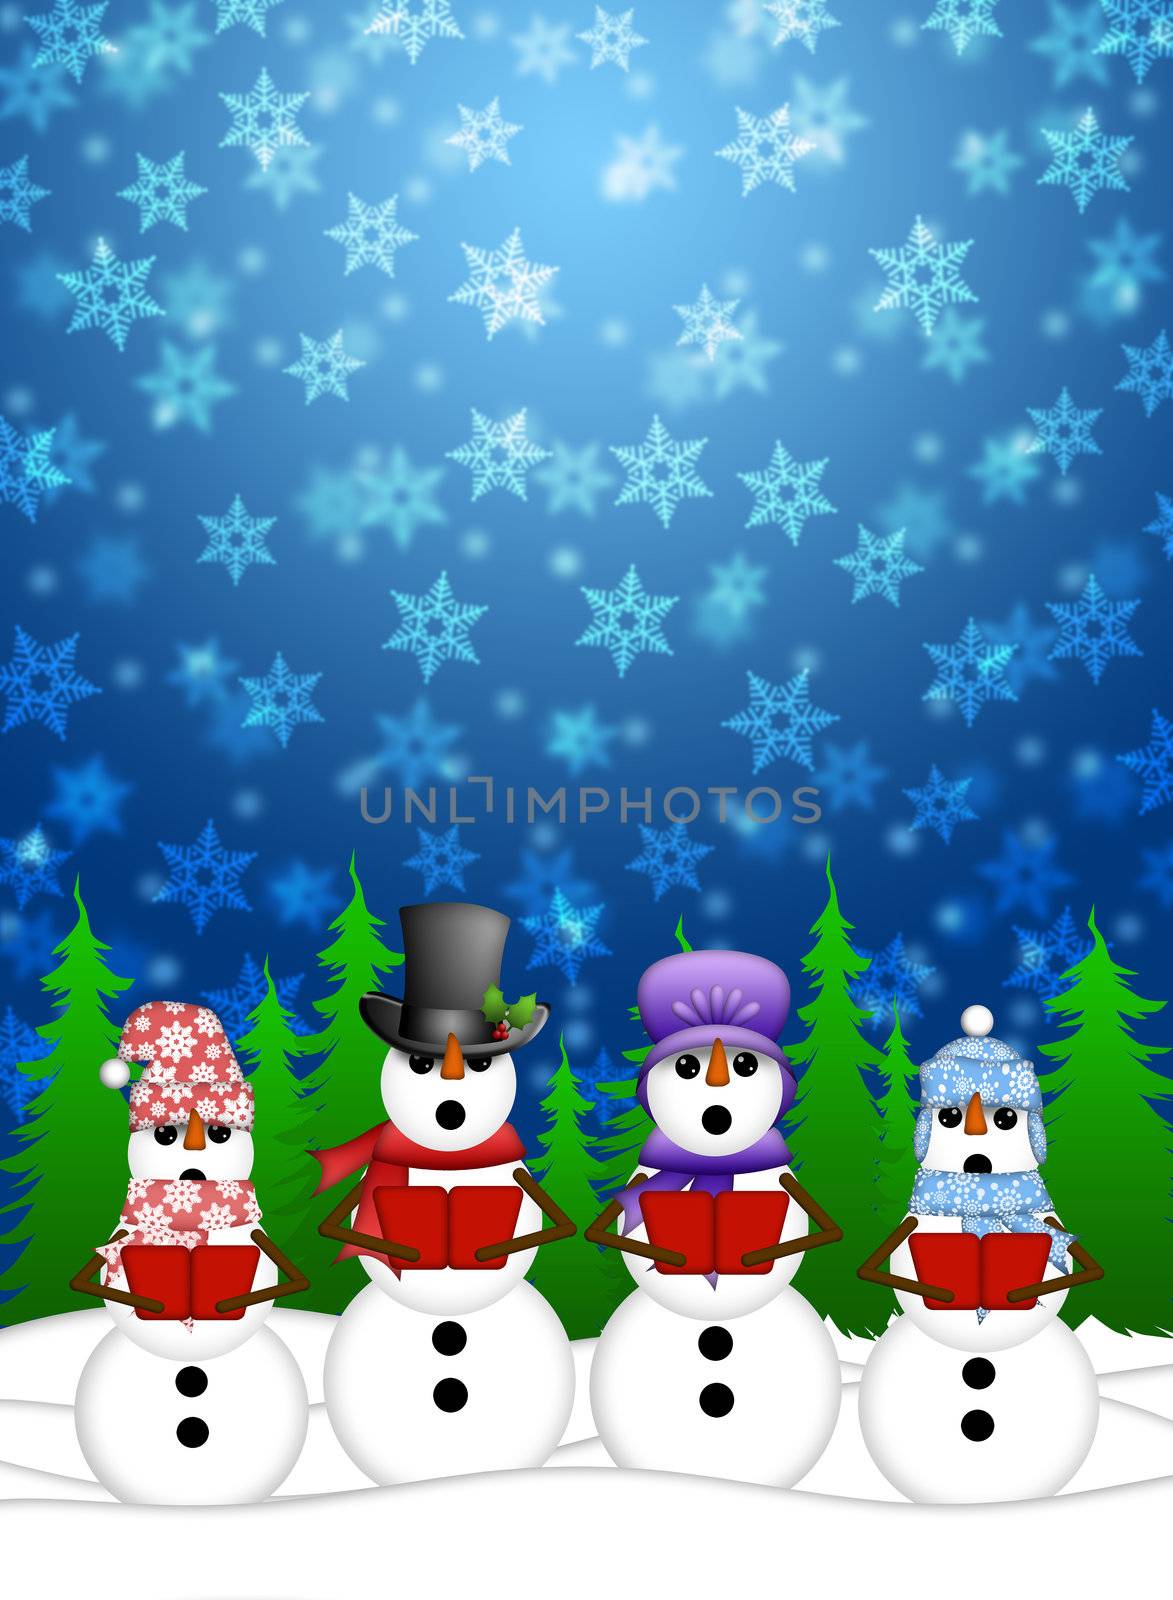 Snowman Carolers Singing Christmas Songs with Snowing Winter Scene Illustration